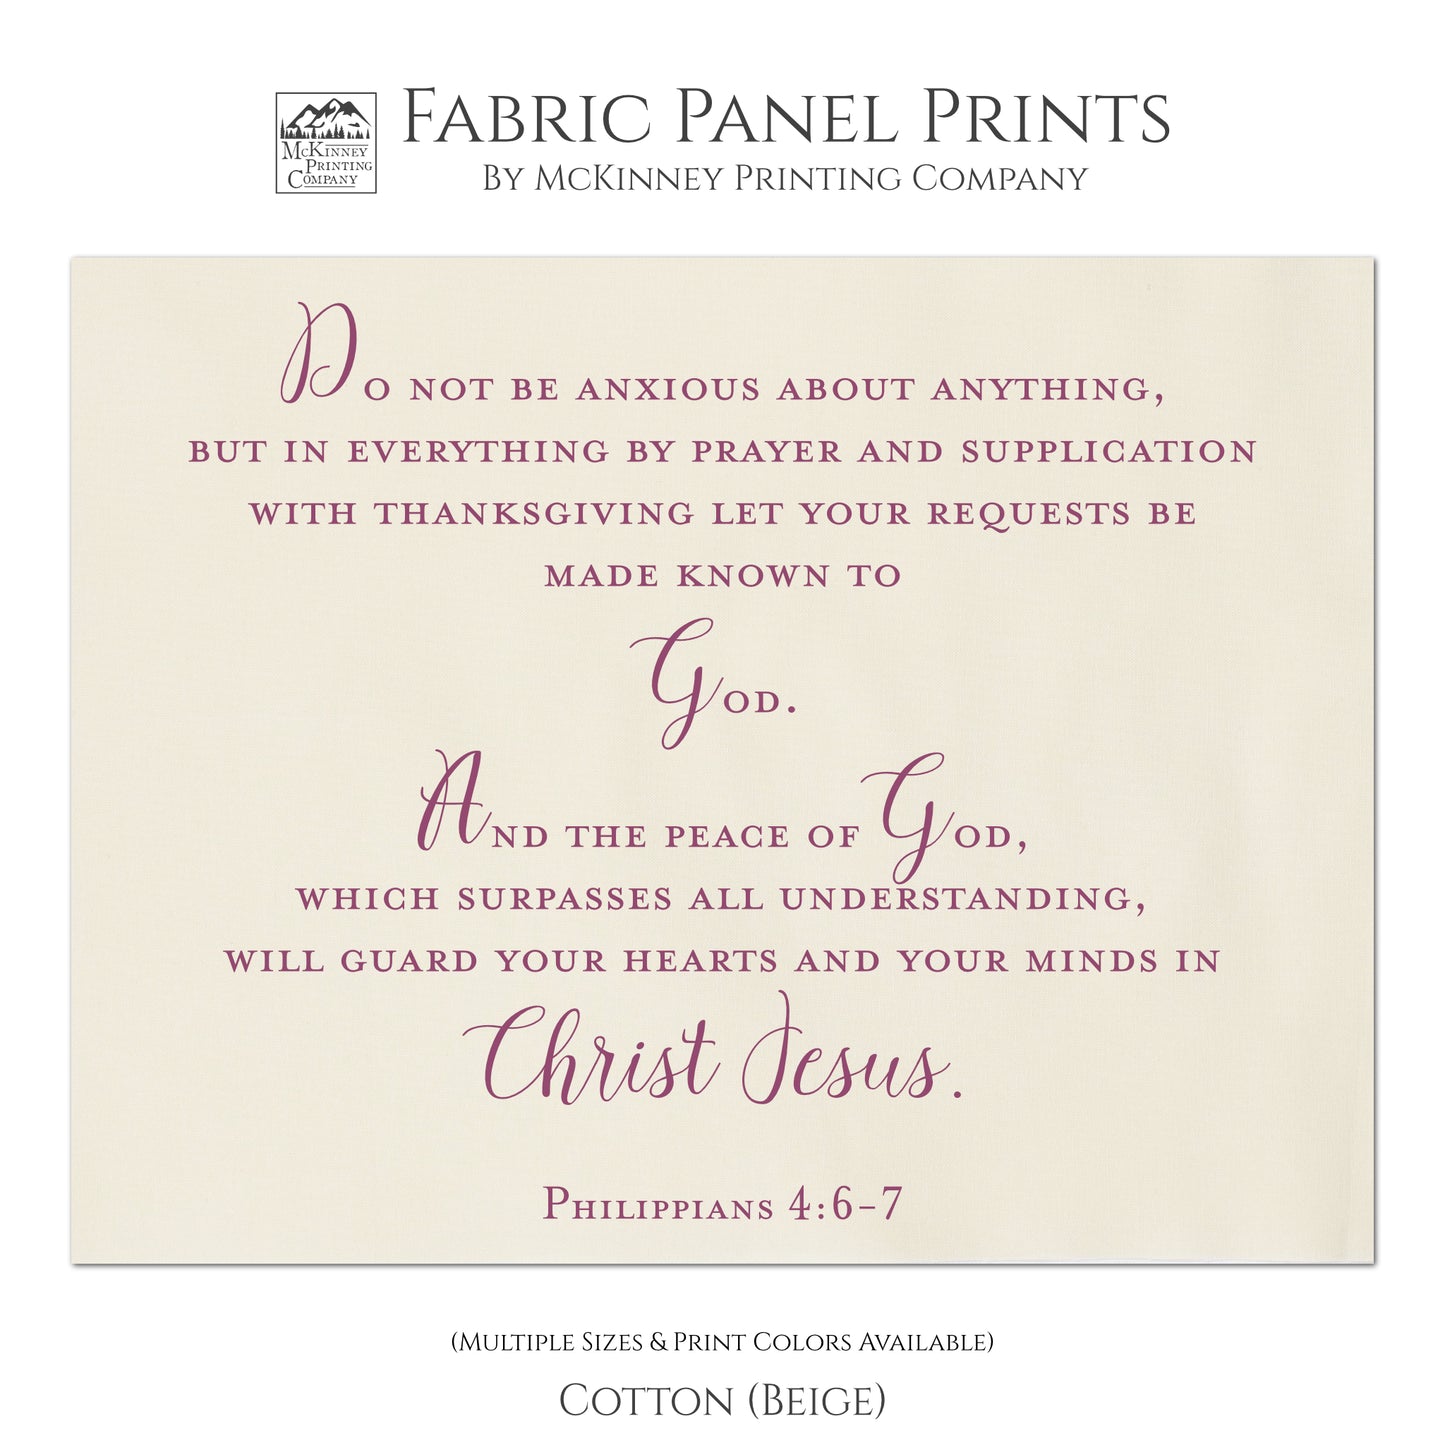 Do not be anxious about anything, but in everything by prayer and supplication with thanksgiving let your requests be made known to God. And the peace of God, which surpasses all understanding, will guard your hearts and your minds in Christ Jesus. Philippians 4:6-7, Bible Verse Fabric, Wall Art, Quilt Block, Fabric Panel Print - Cotton